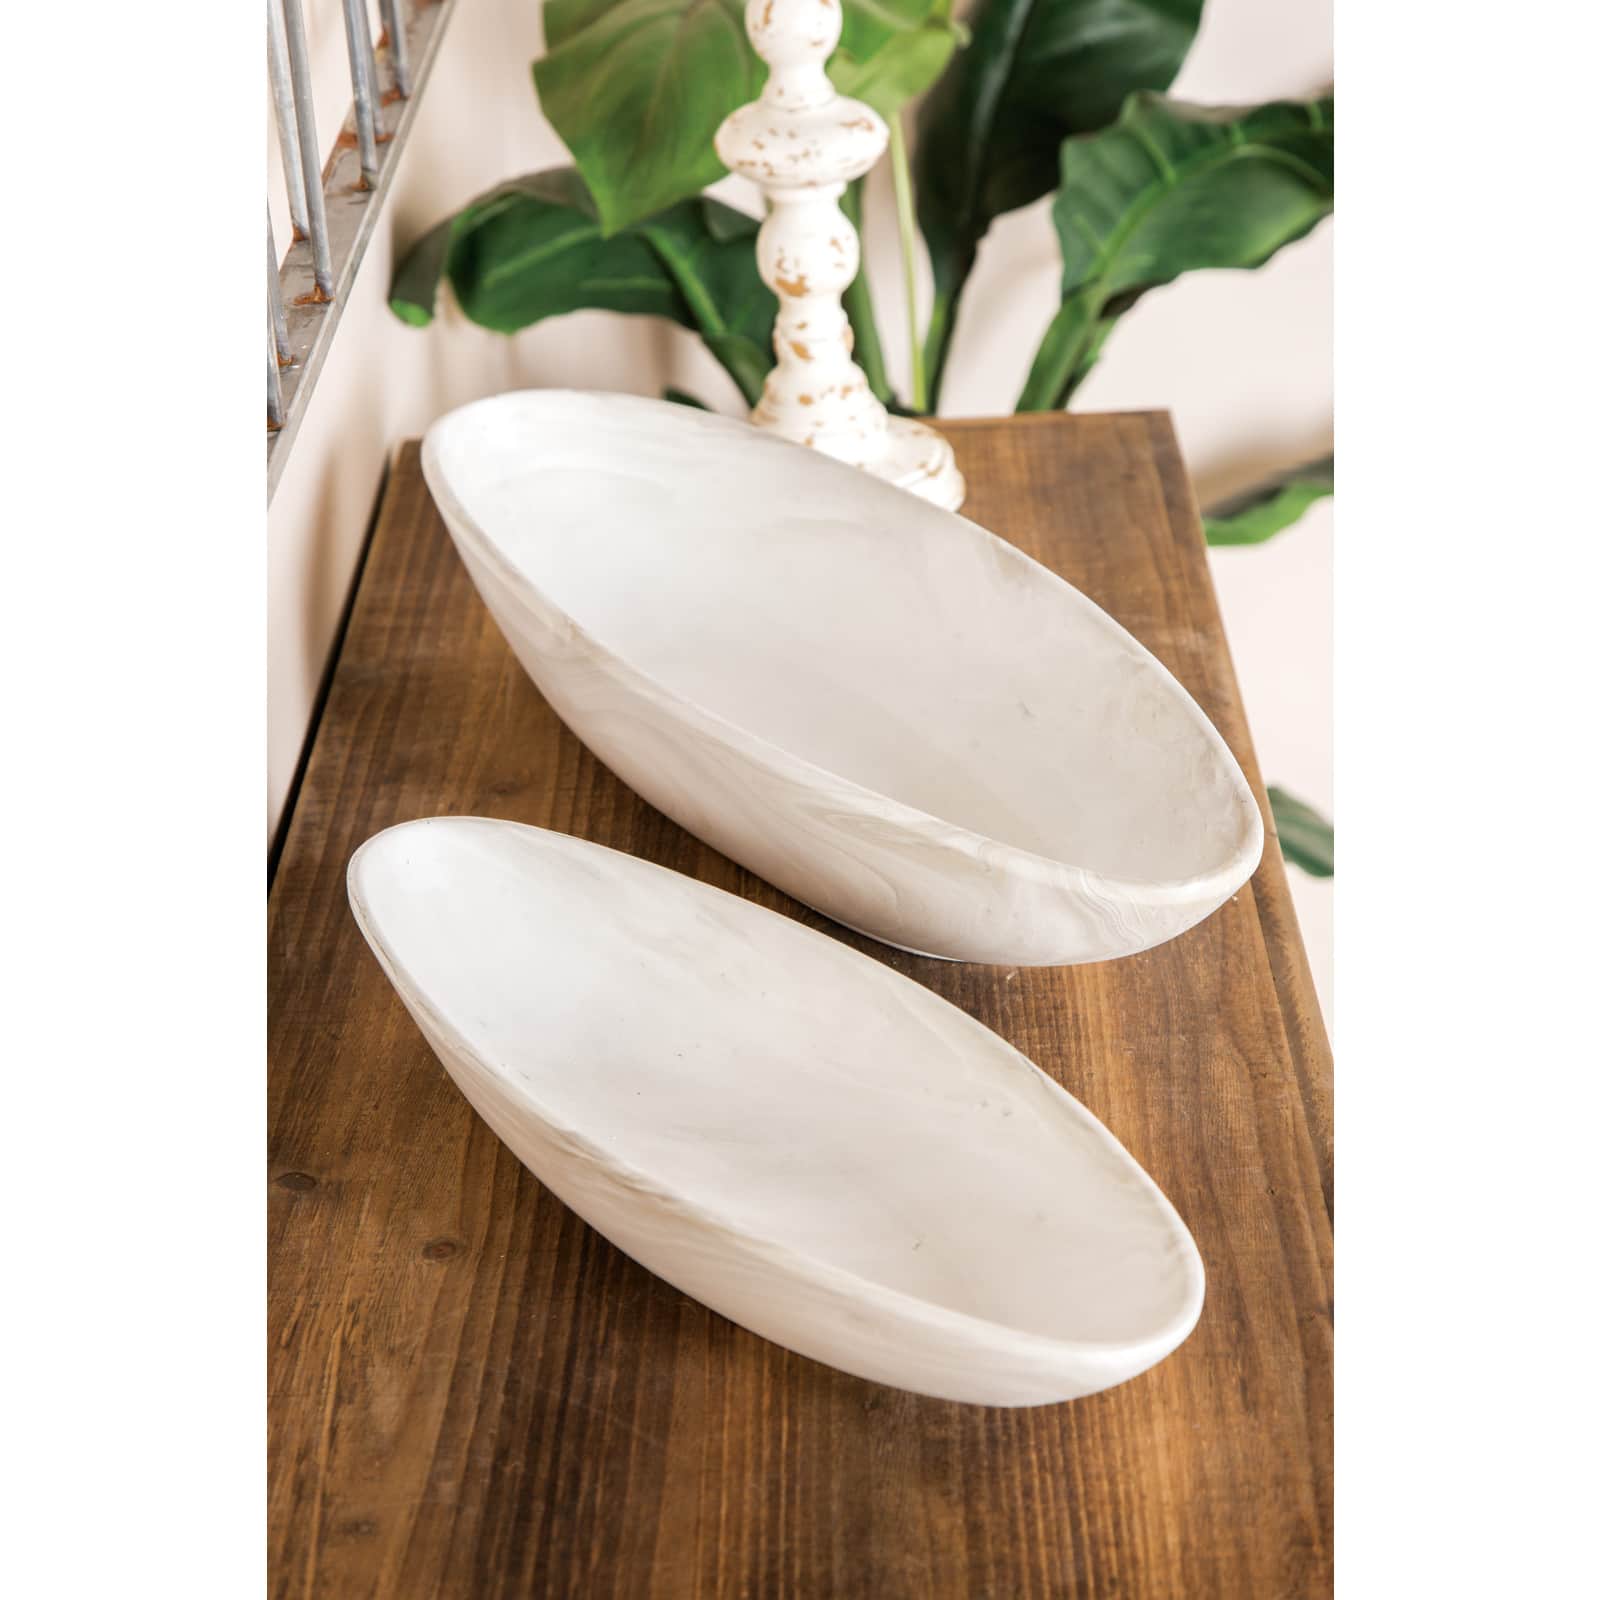 CosmoLiving by Cosmopolitan White Porcelain Country Planter Set